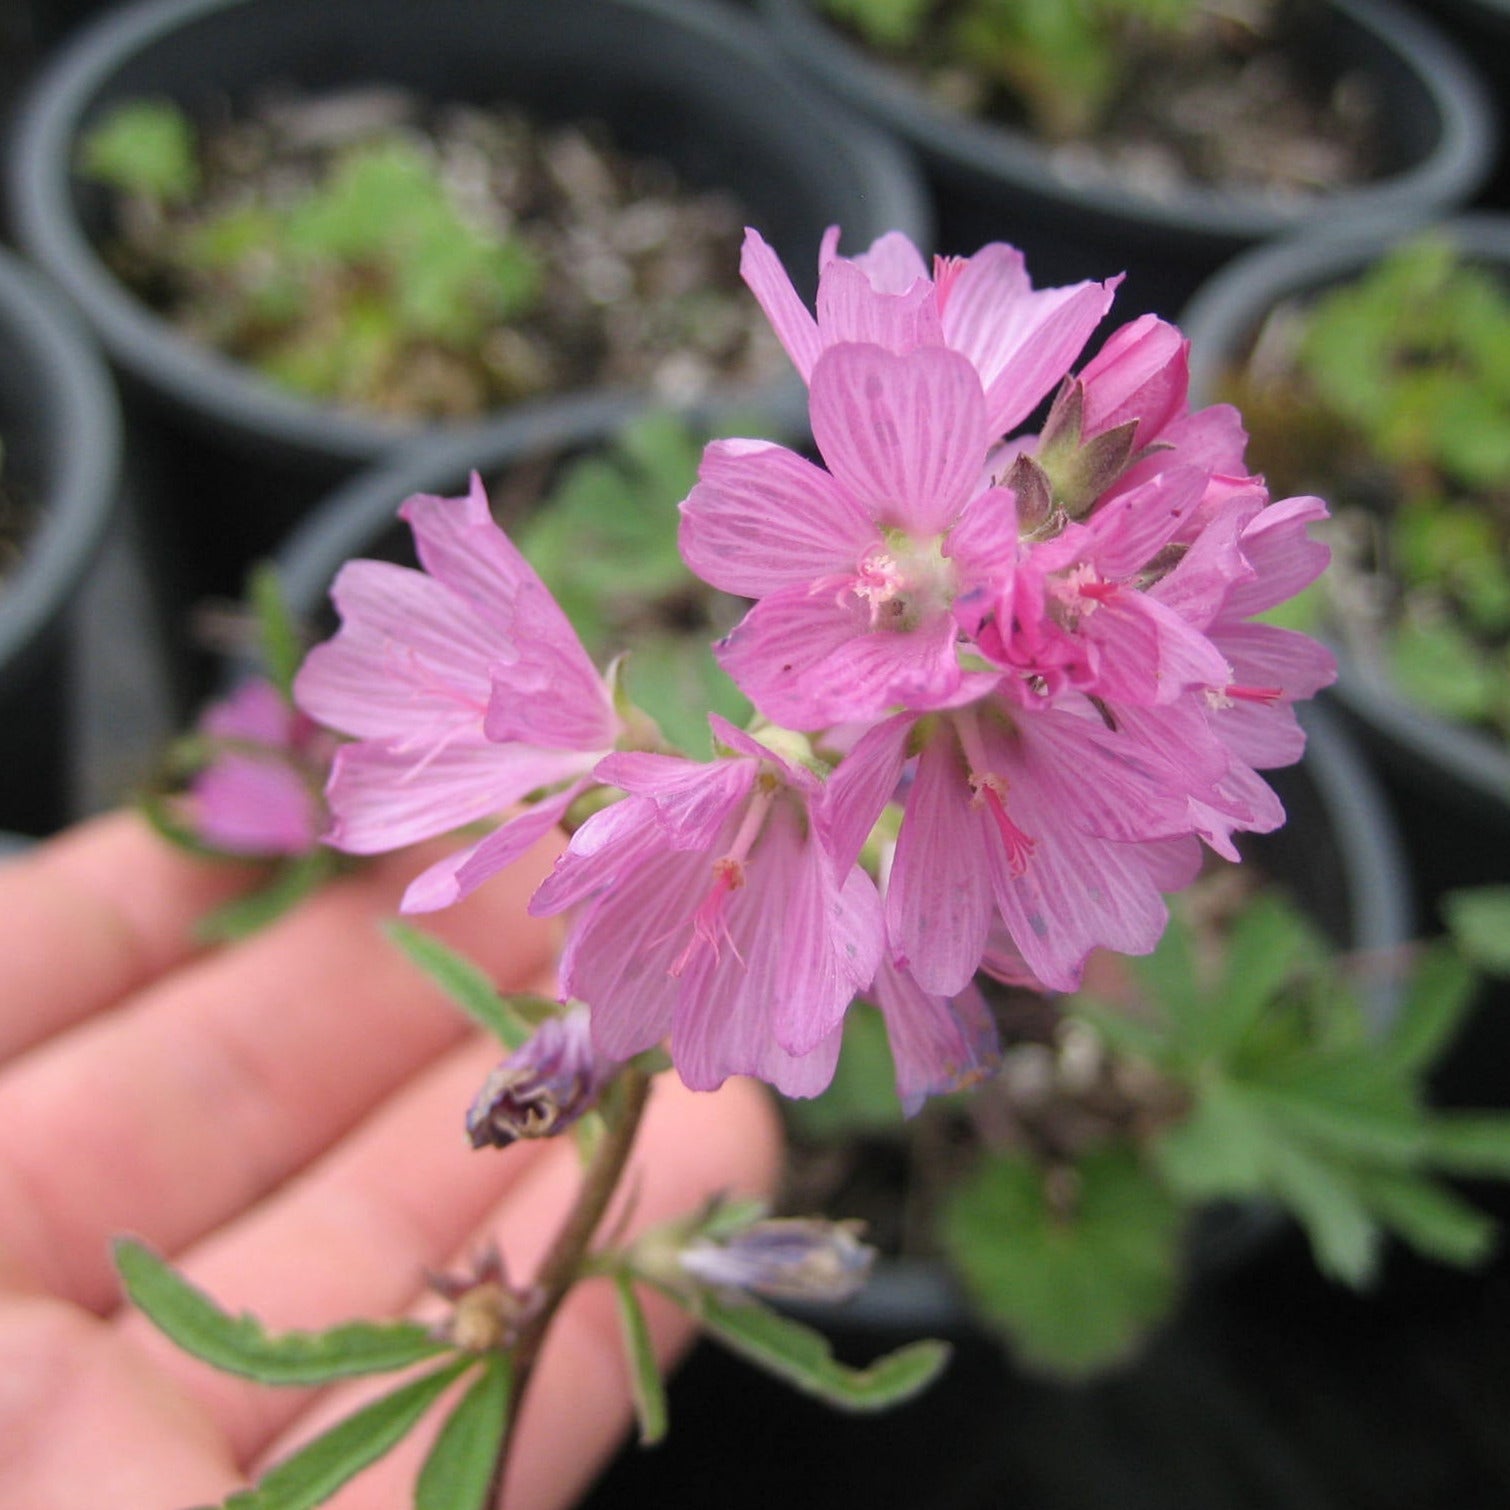 A hand holding up a cluster of light pink flowers. They have thin, paper-like petals.